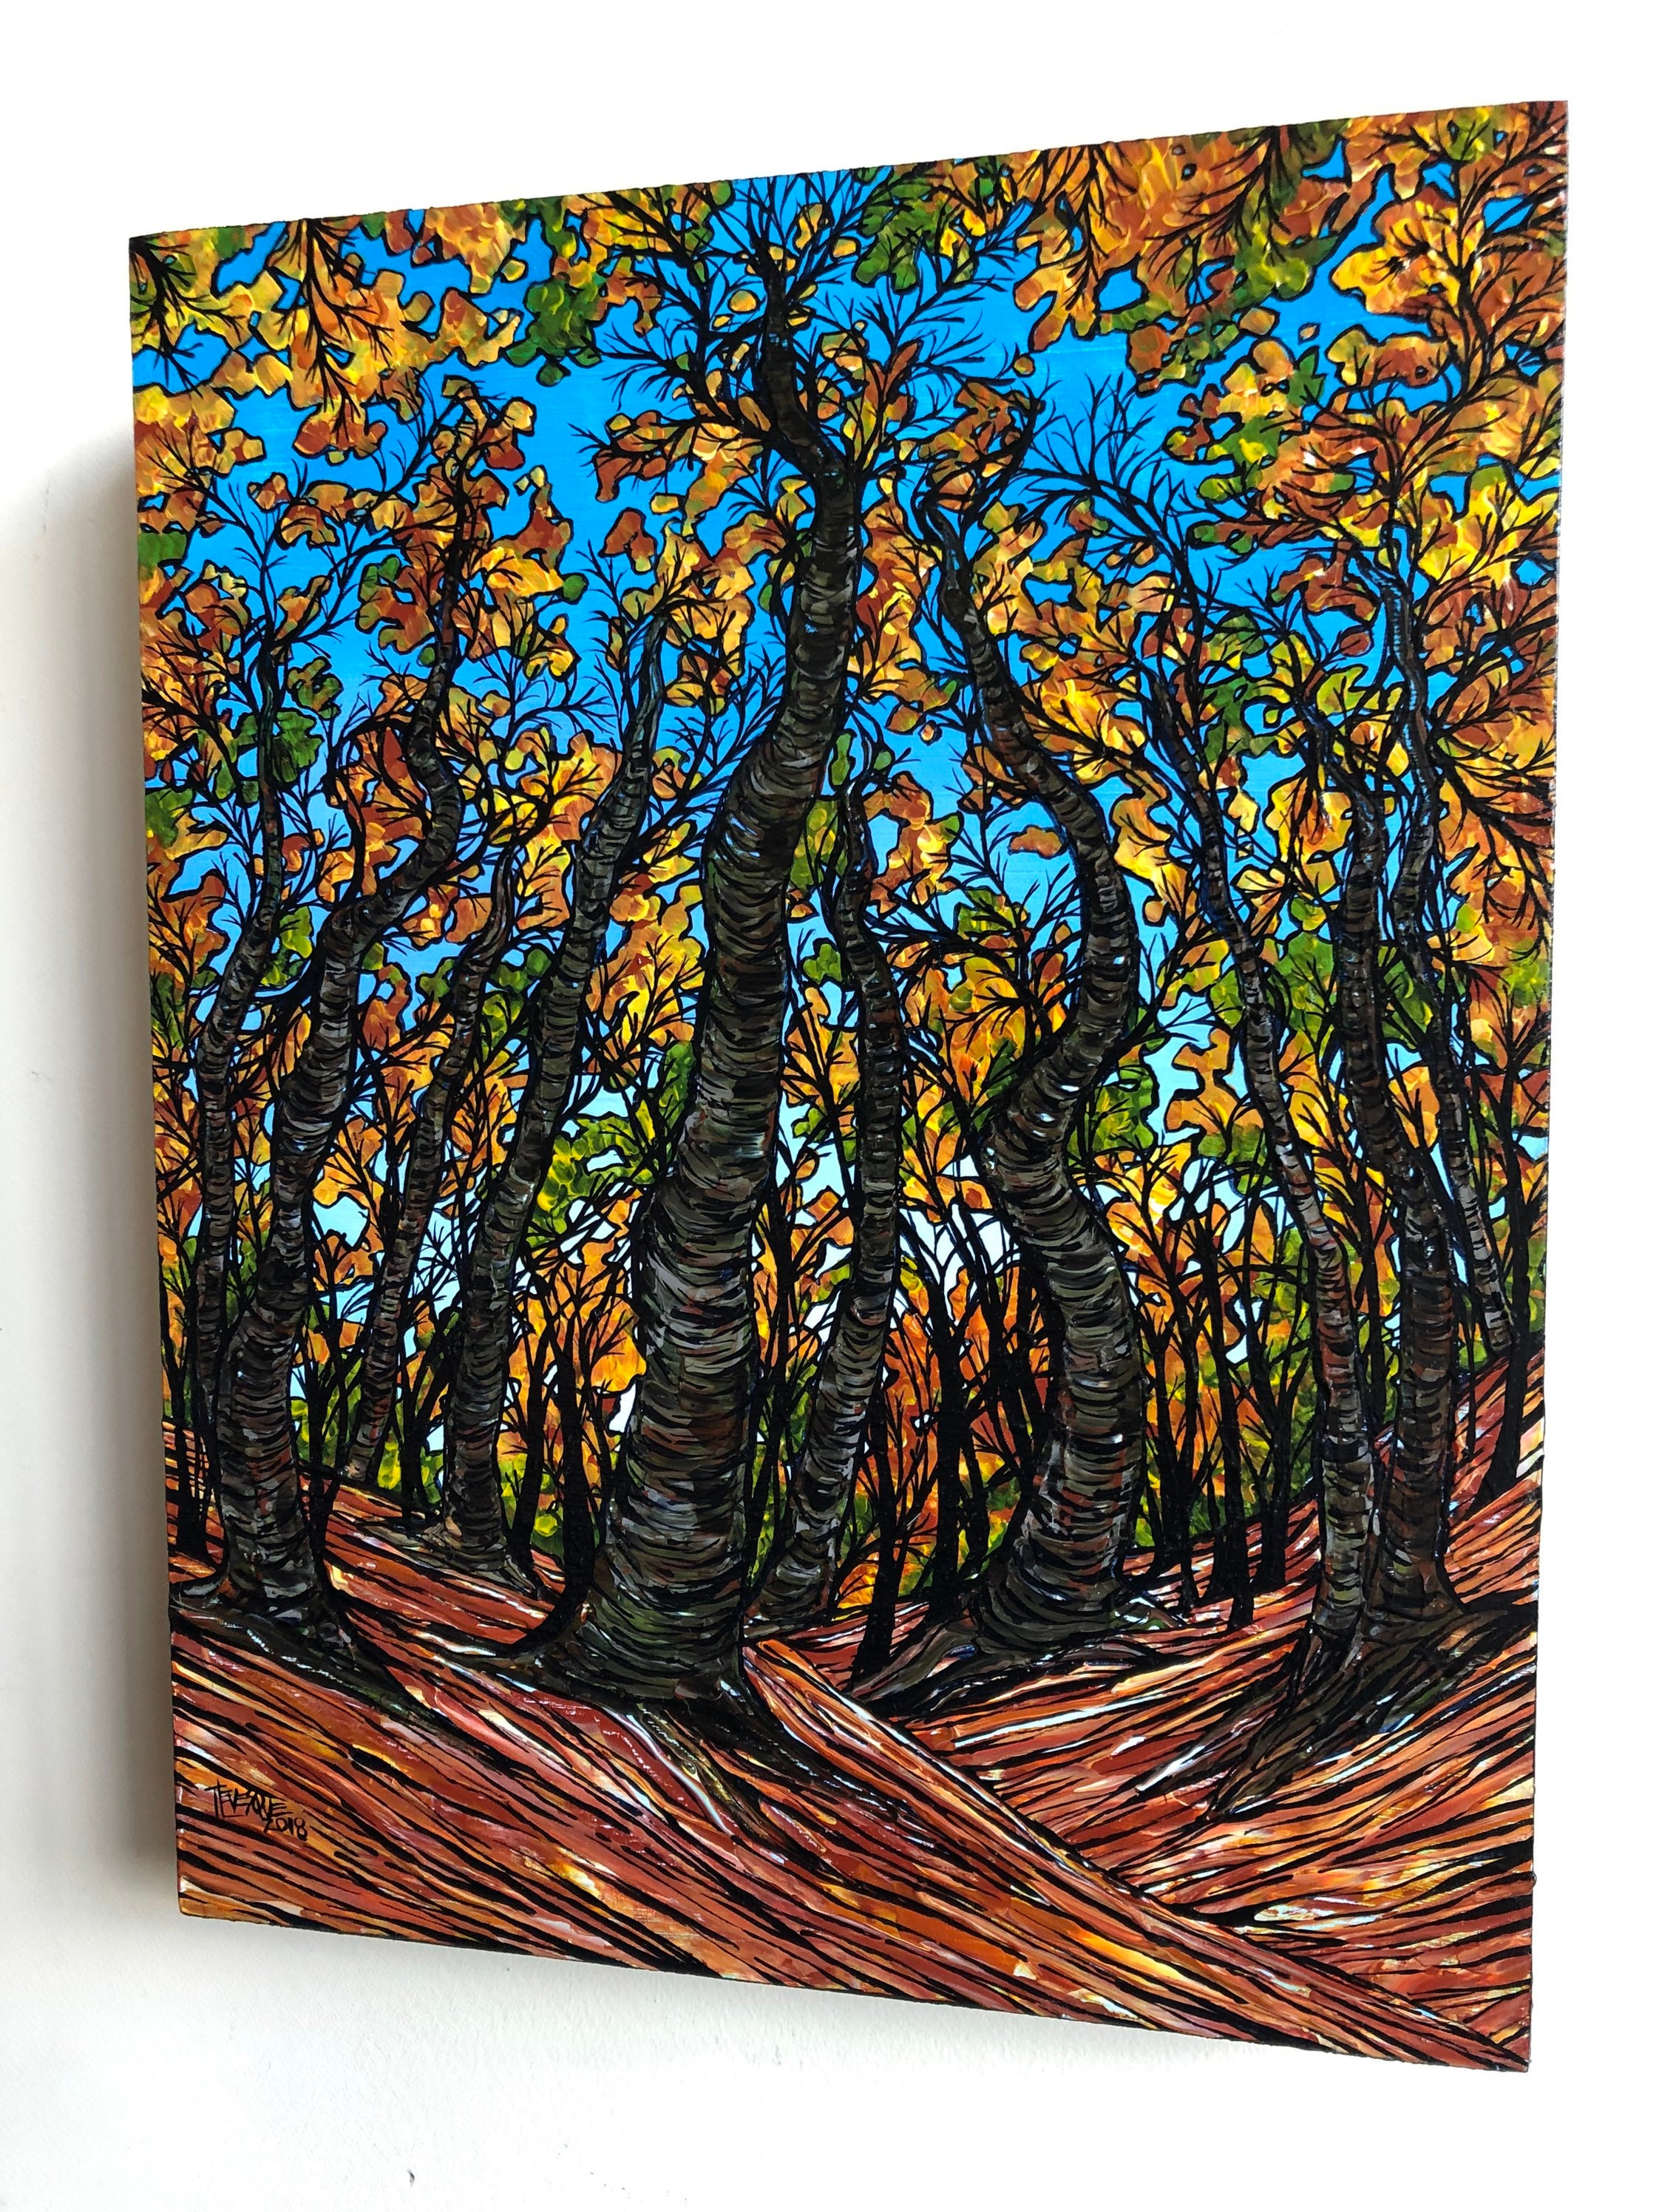 Walden Pond Trees 11x14” original acrylic painting on wood panel by ...